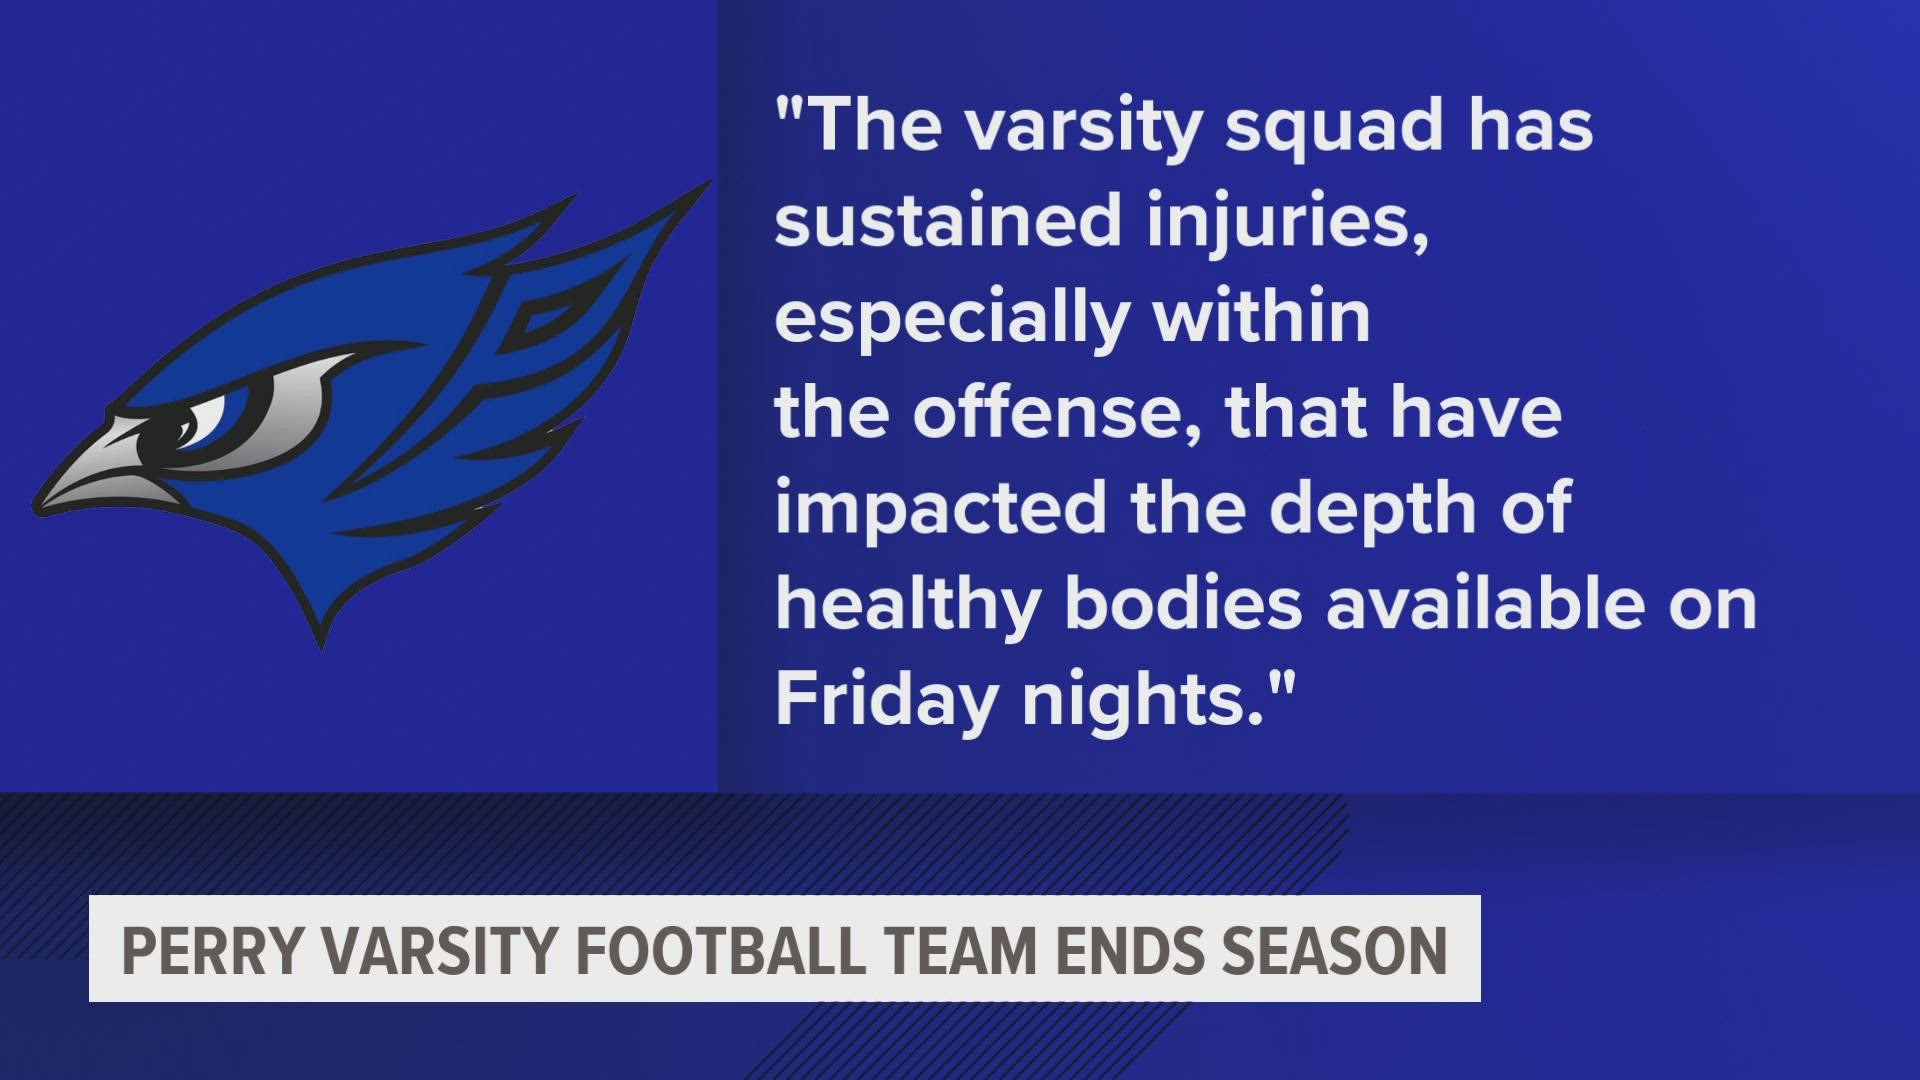 The varsity team has forfeited the rest of their season. However, they plan on playing the remaining 9th grade games if their opponents are free.